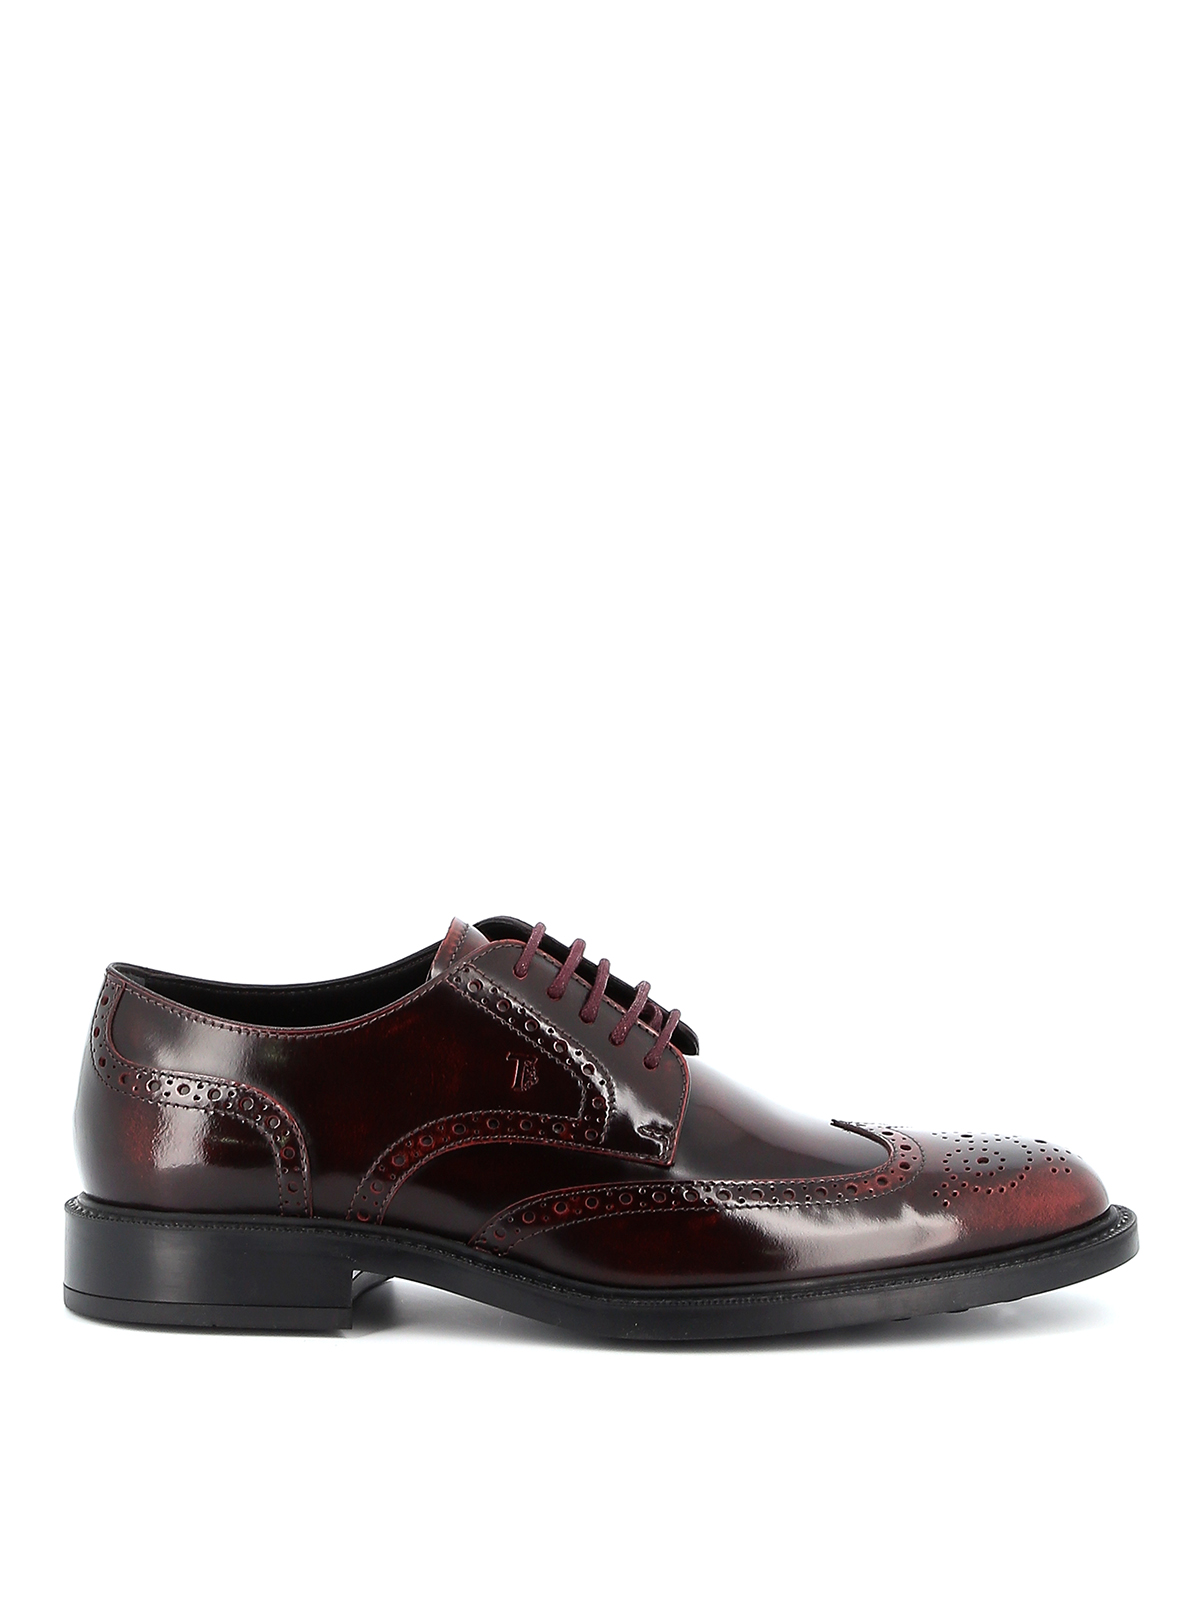 TOD'S SEMI-GLOSSY BRUSHED LEATHER DERBY SHOES